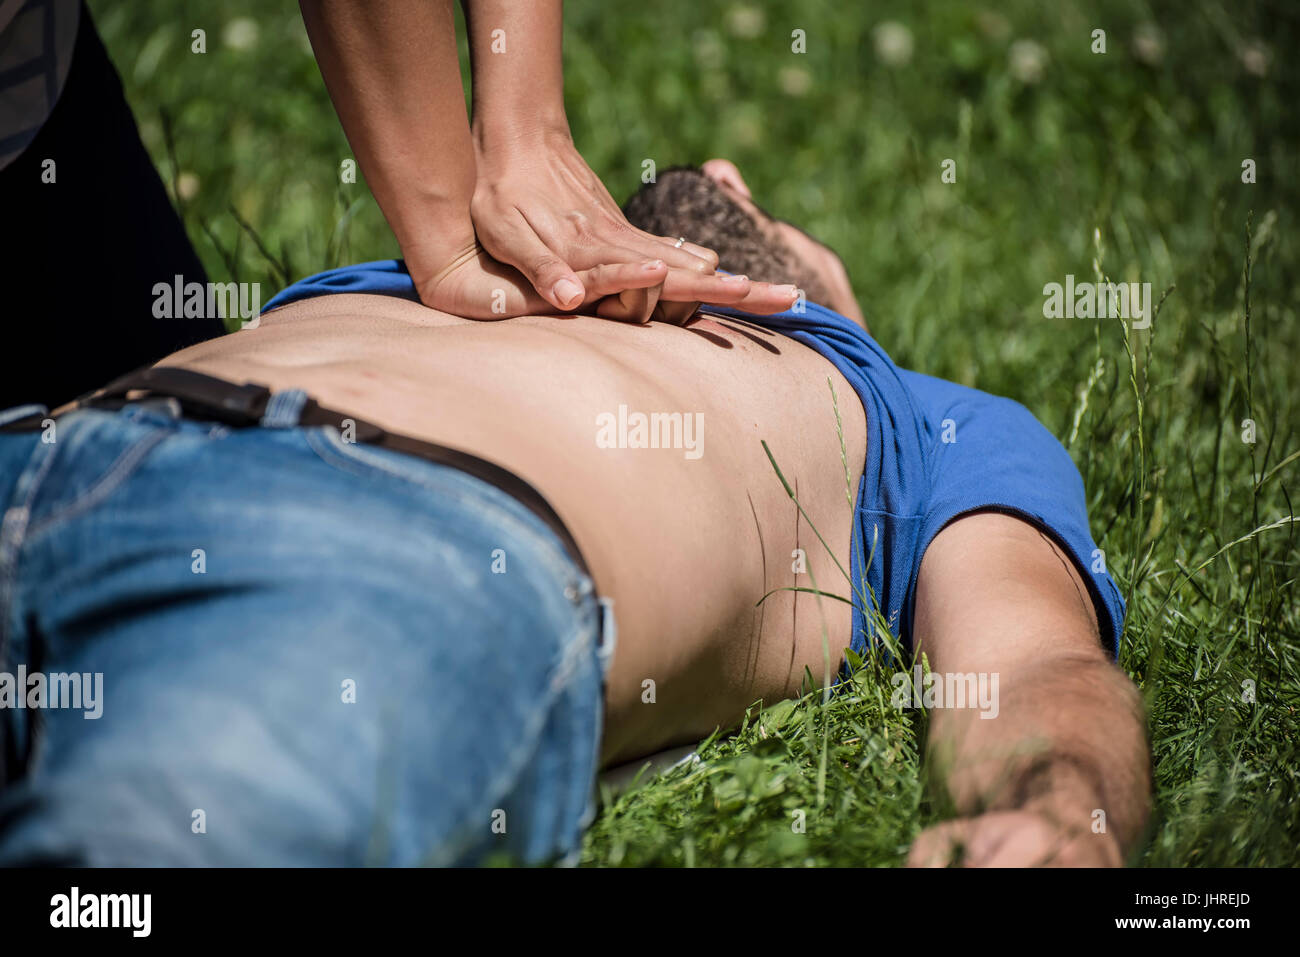 girl making cardiopulmonary resuscitation to an unconscious guy after heart attack Stock Photo